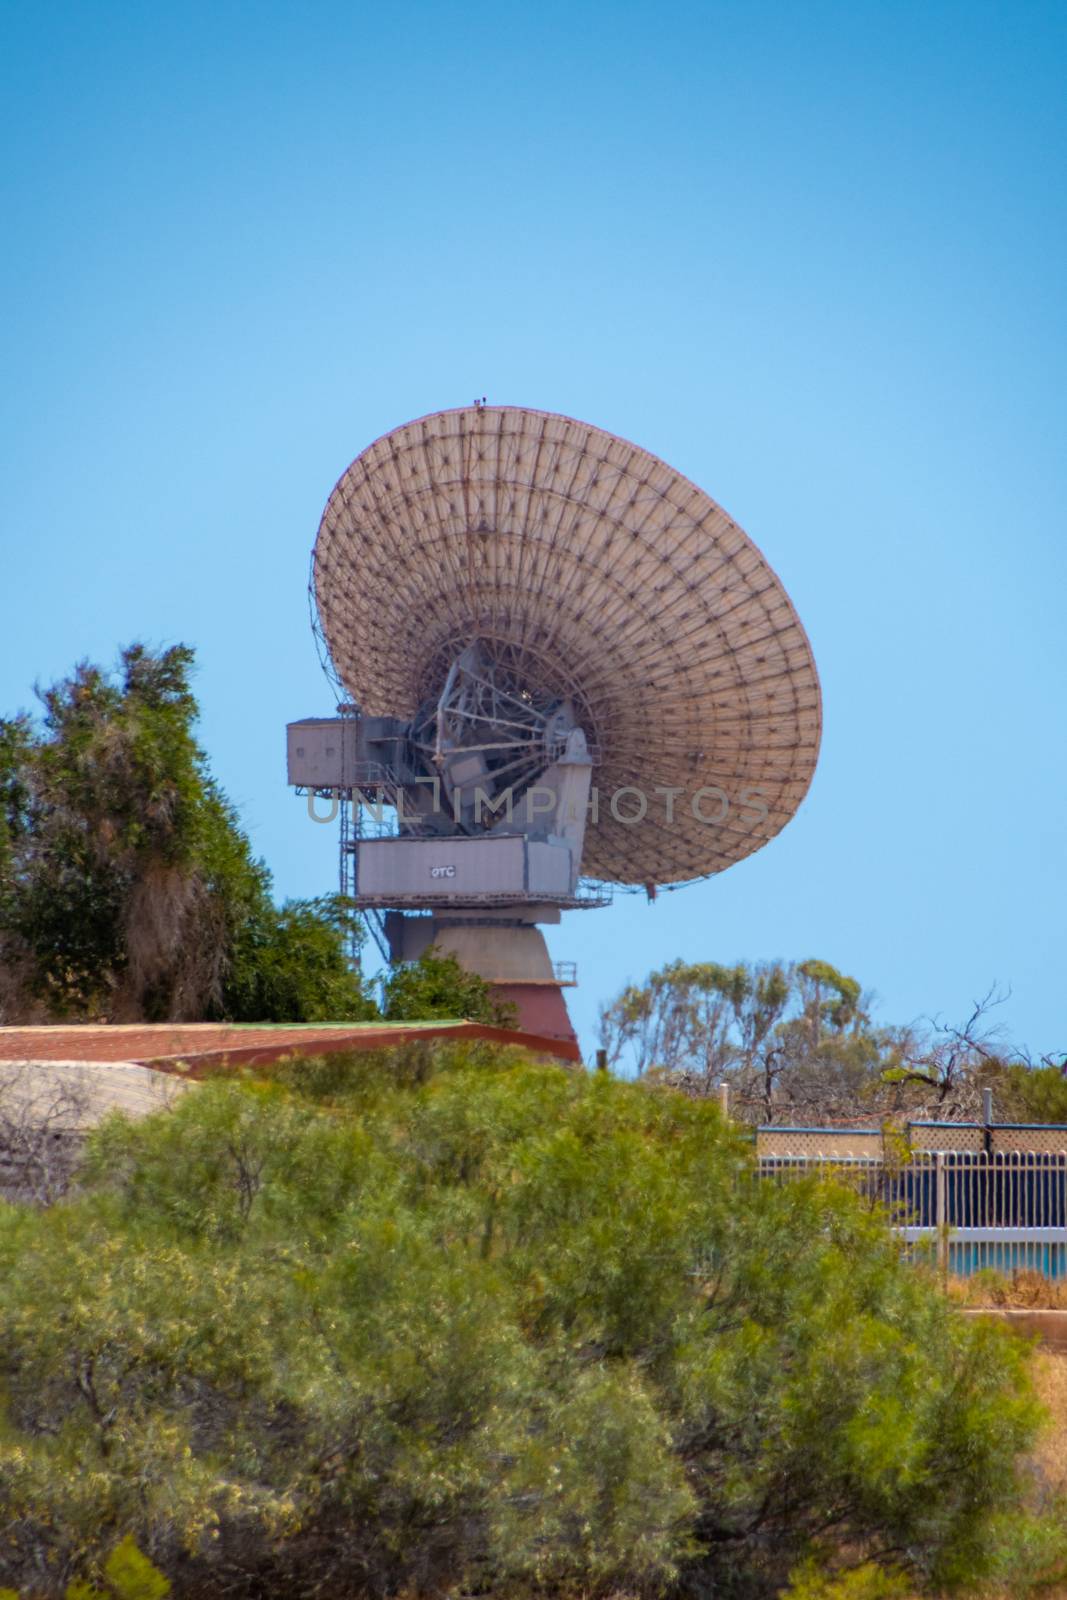 Historic satellite dish from the Apollo era at Carnarvon Space and History Museum in Western Australia